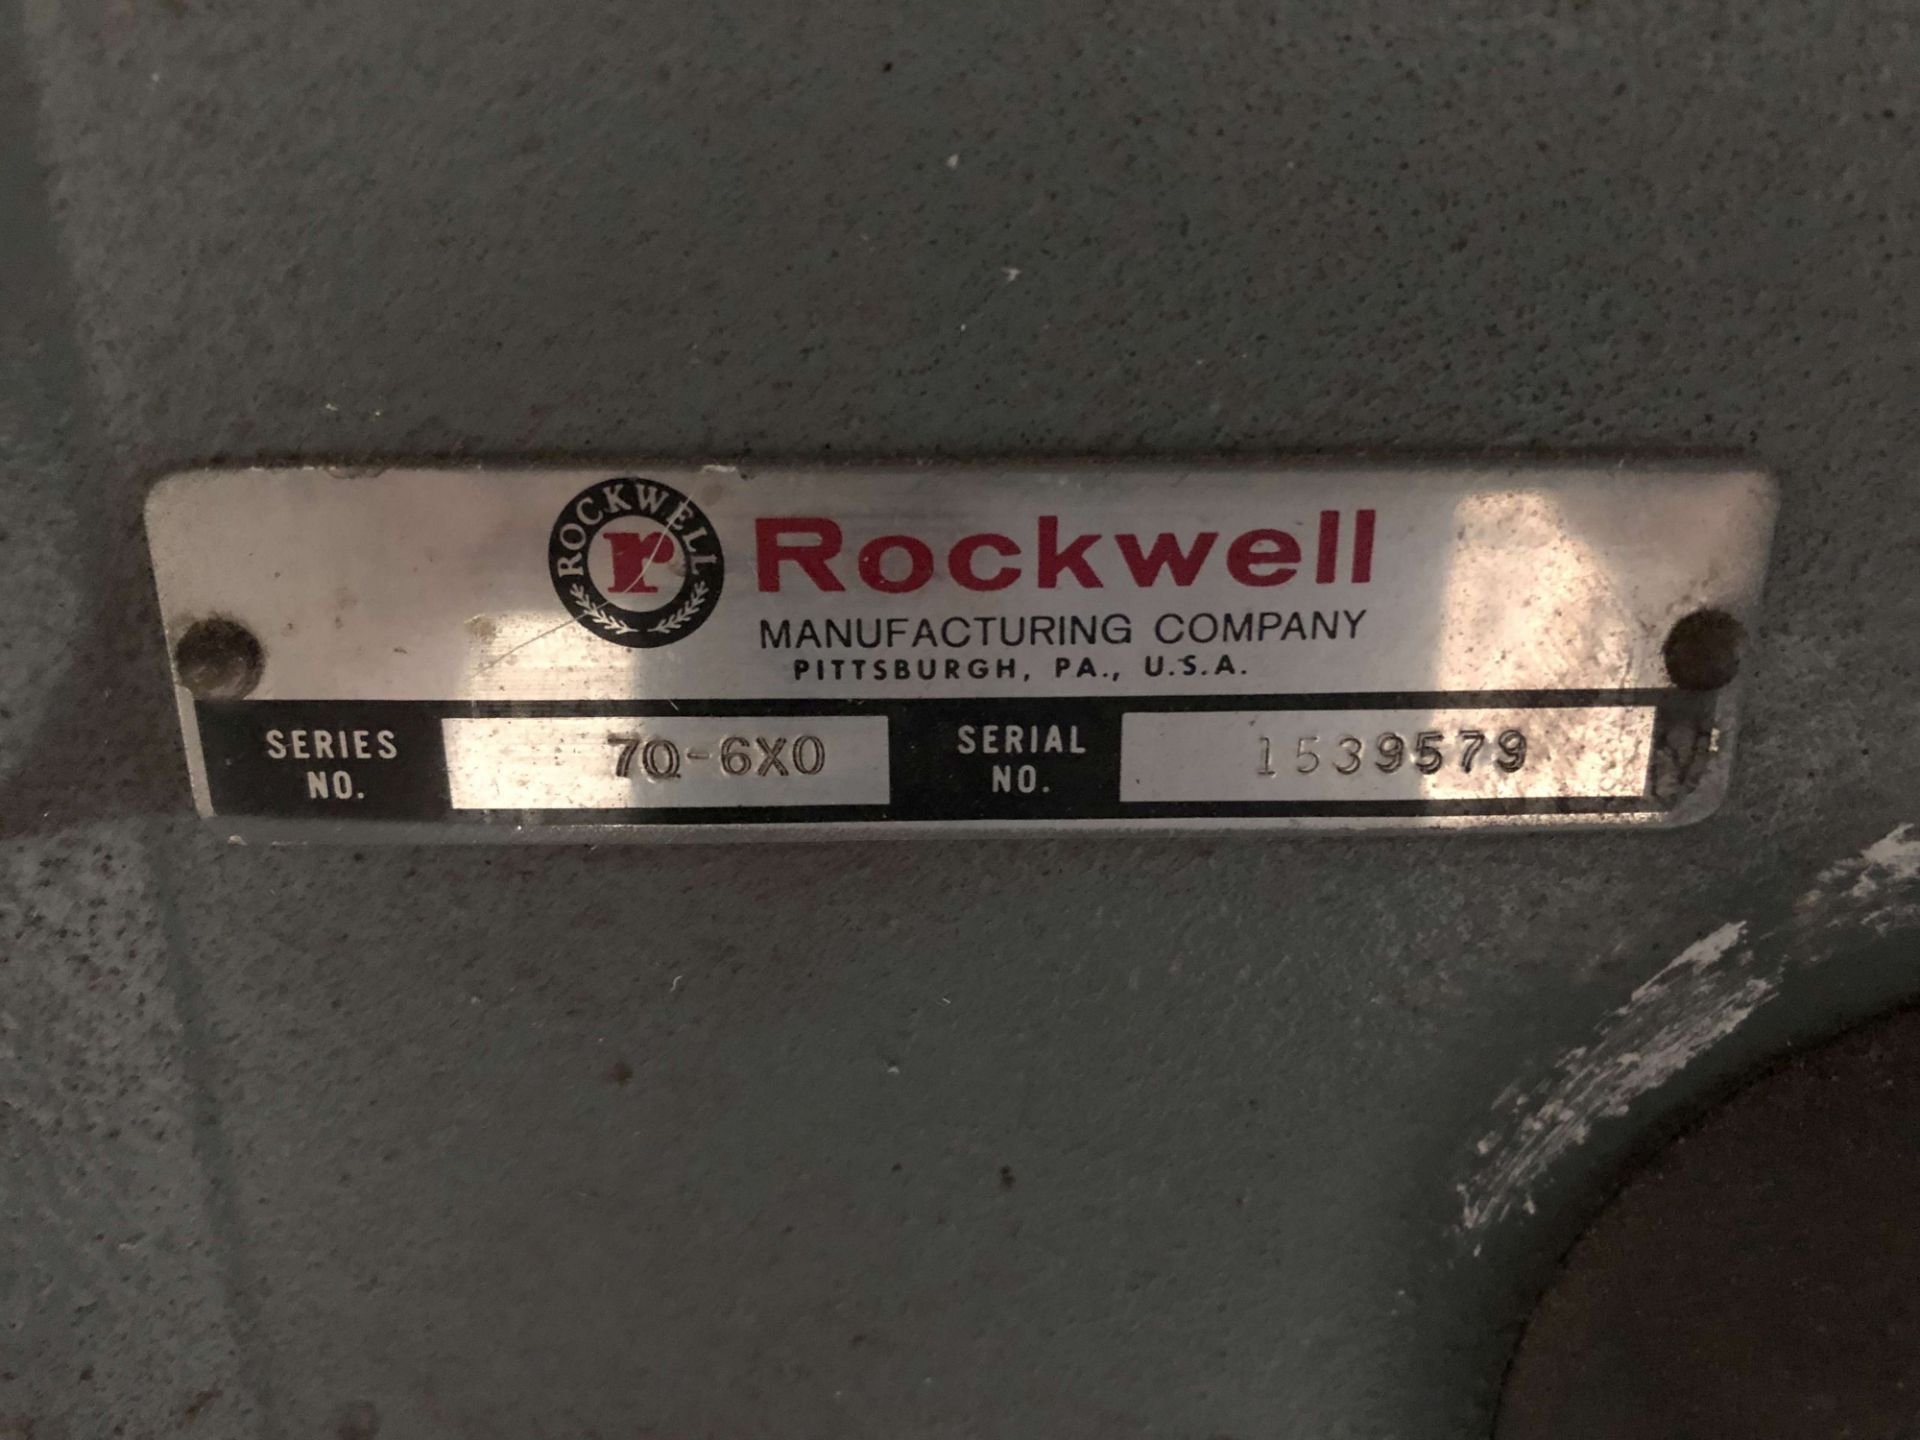 Rockwell/Delta 20" Floor Drill Press, Series No. 70-6X0, 200-2000 RPM, S/N 1539579 - Image 3 of 3